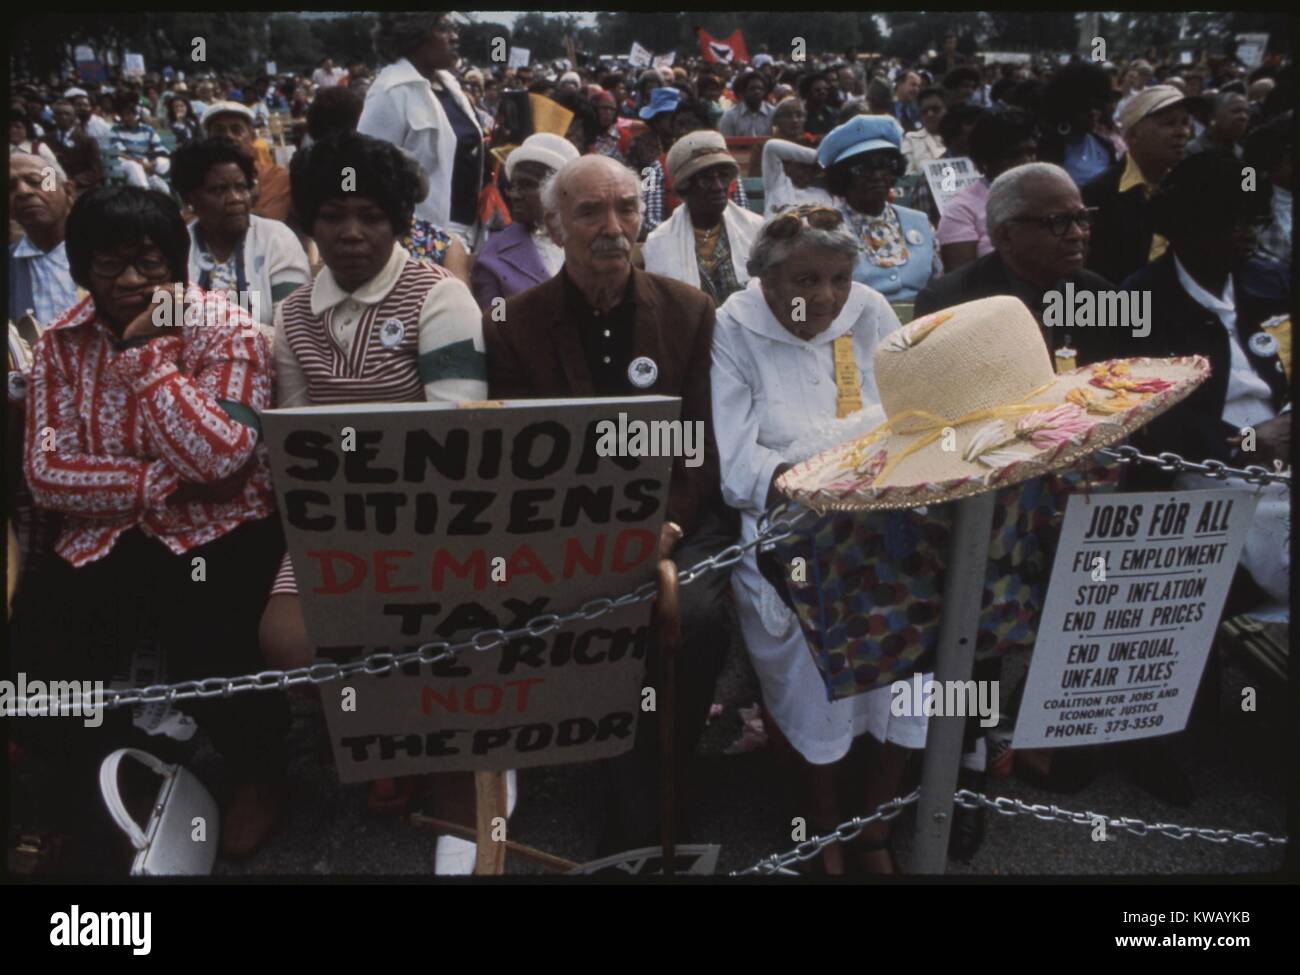 Senior Citizens stop along Lake Shore Drive in Chicago, Illinois to hear speeches during a march led by Reverand Jesse Jackson and Operation PUSH to protest inflation, unemployment, and high taxes, October, 1973. Stock Photo